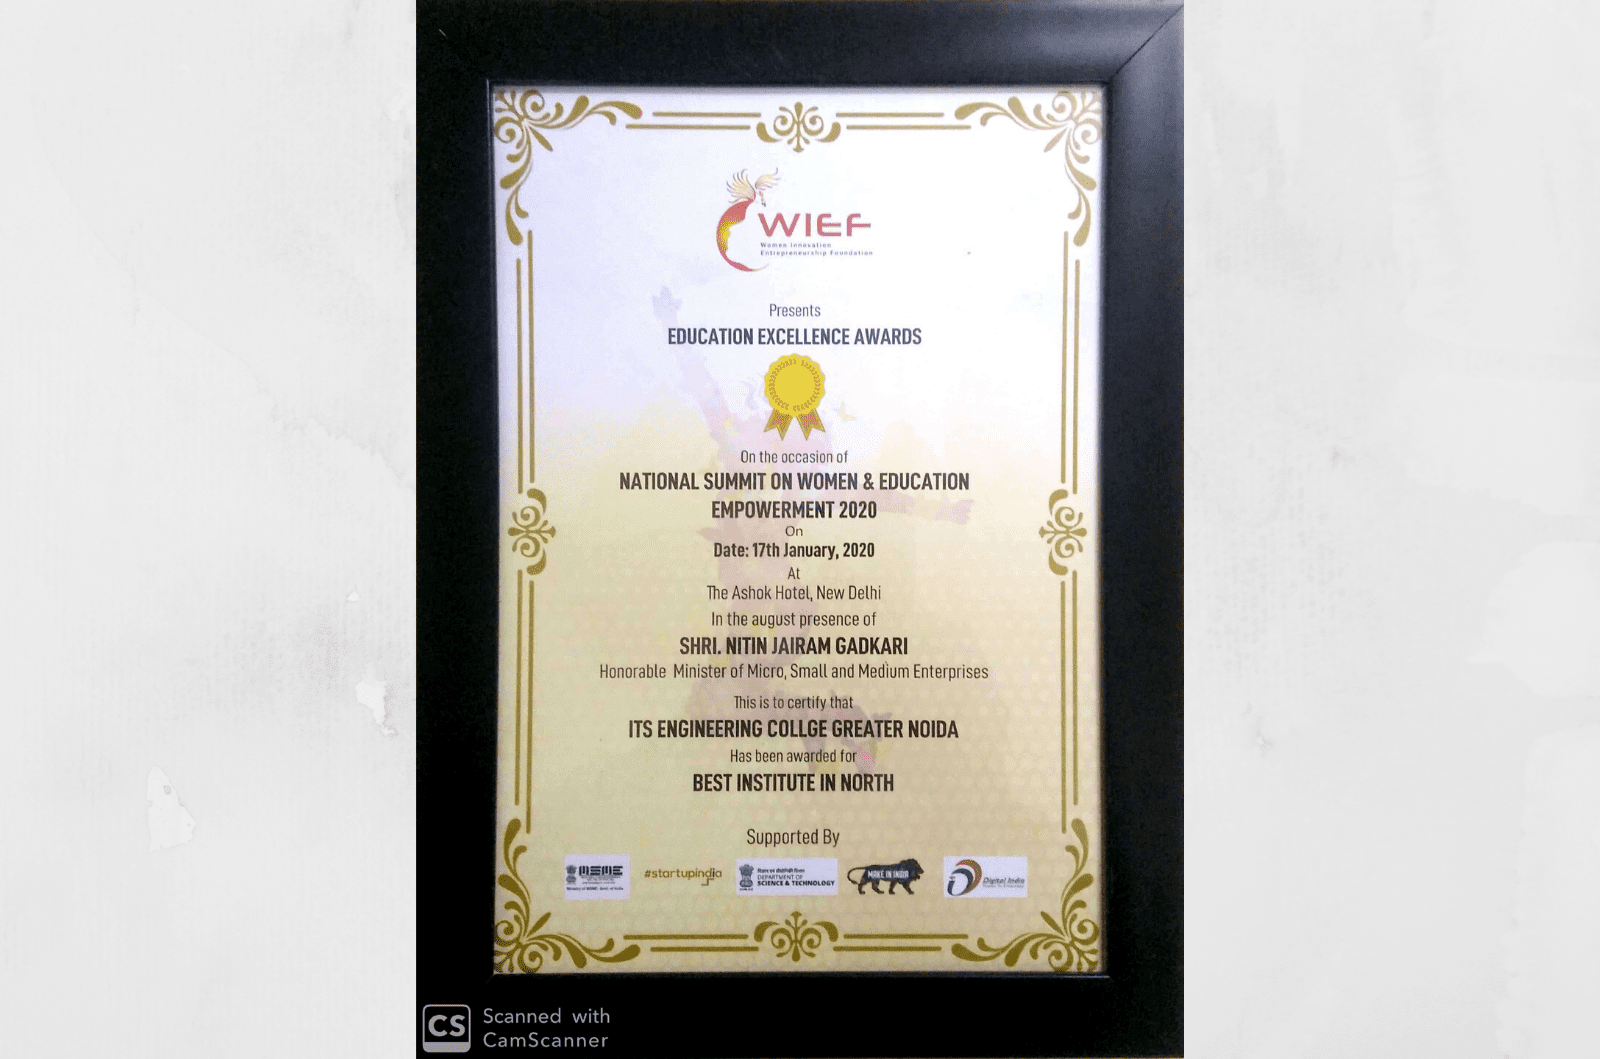 WIEF Education Excellence Award photo frame